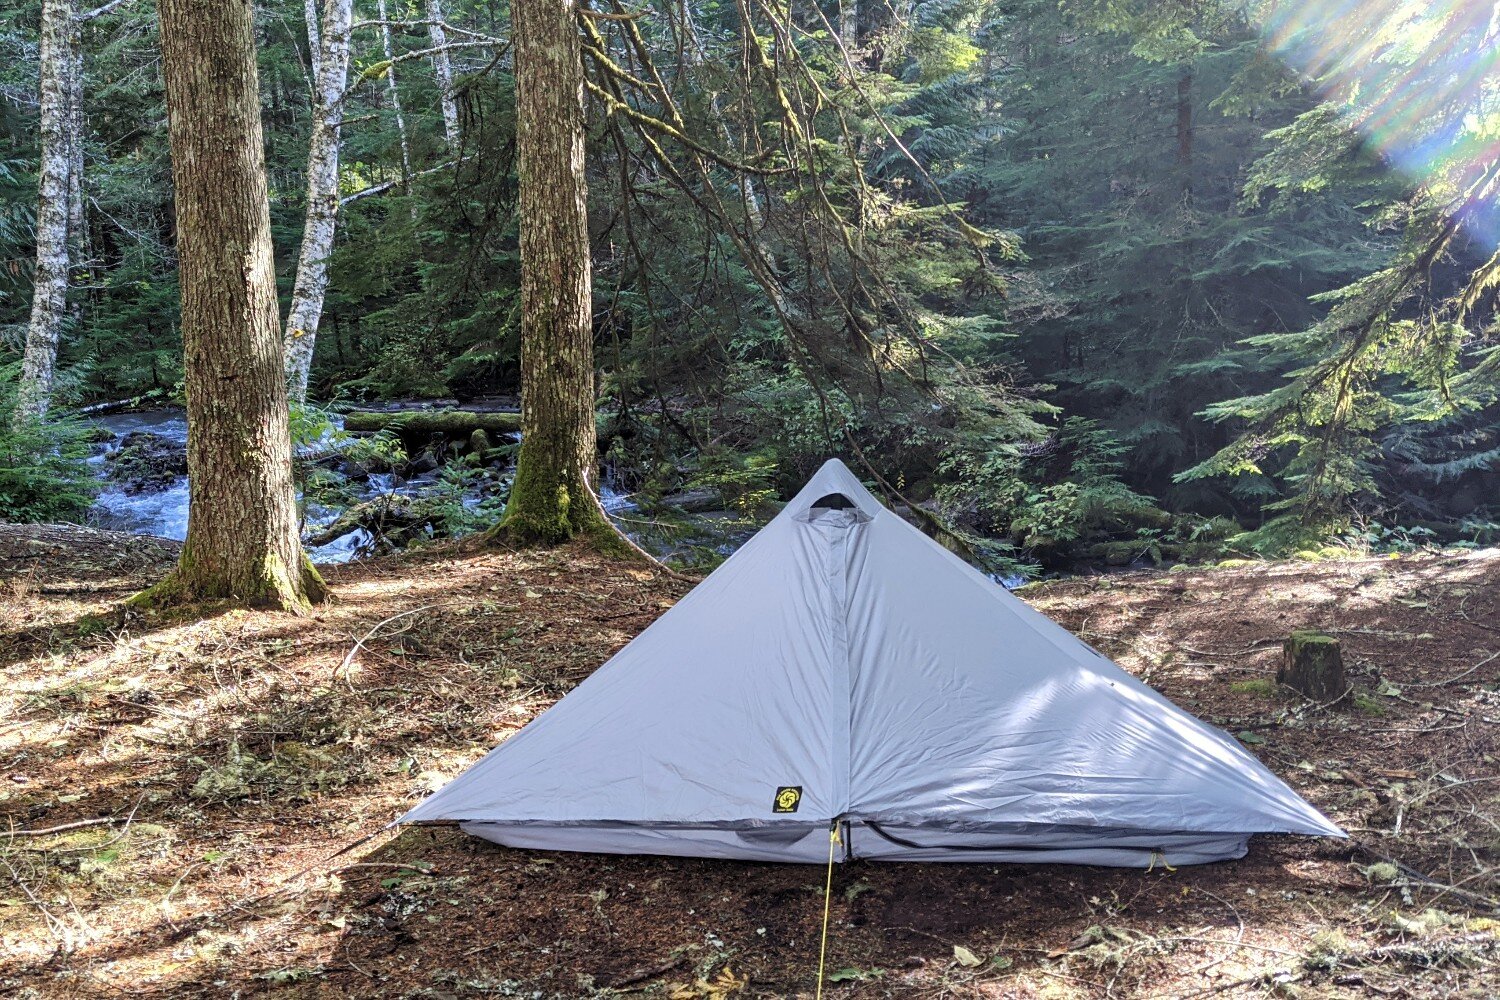 The Lunar Solo is a single-wall tent, meaning the inner tent body and outer tarp are one single unit